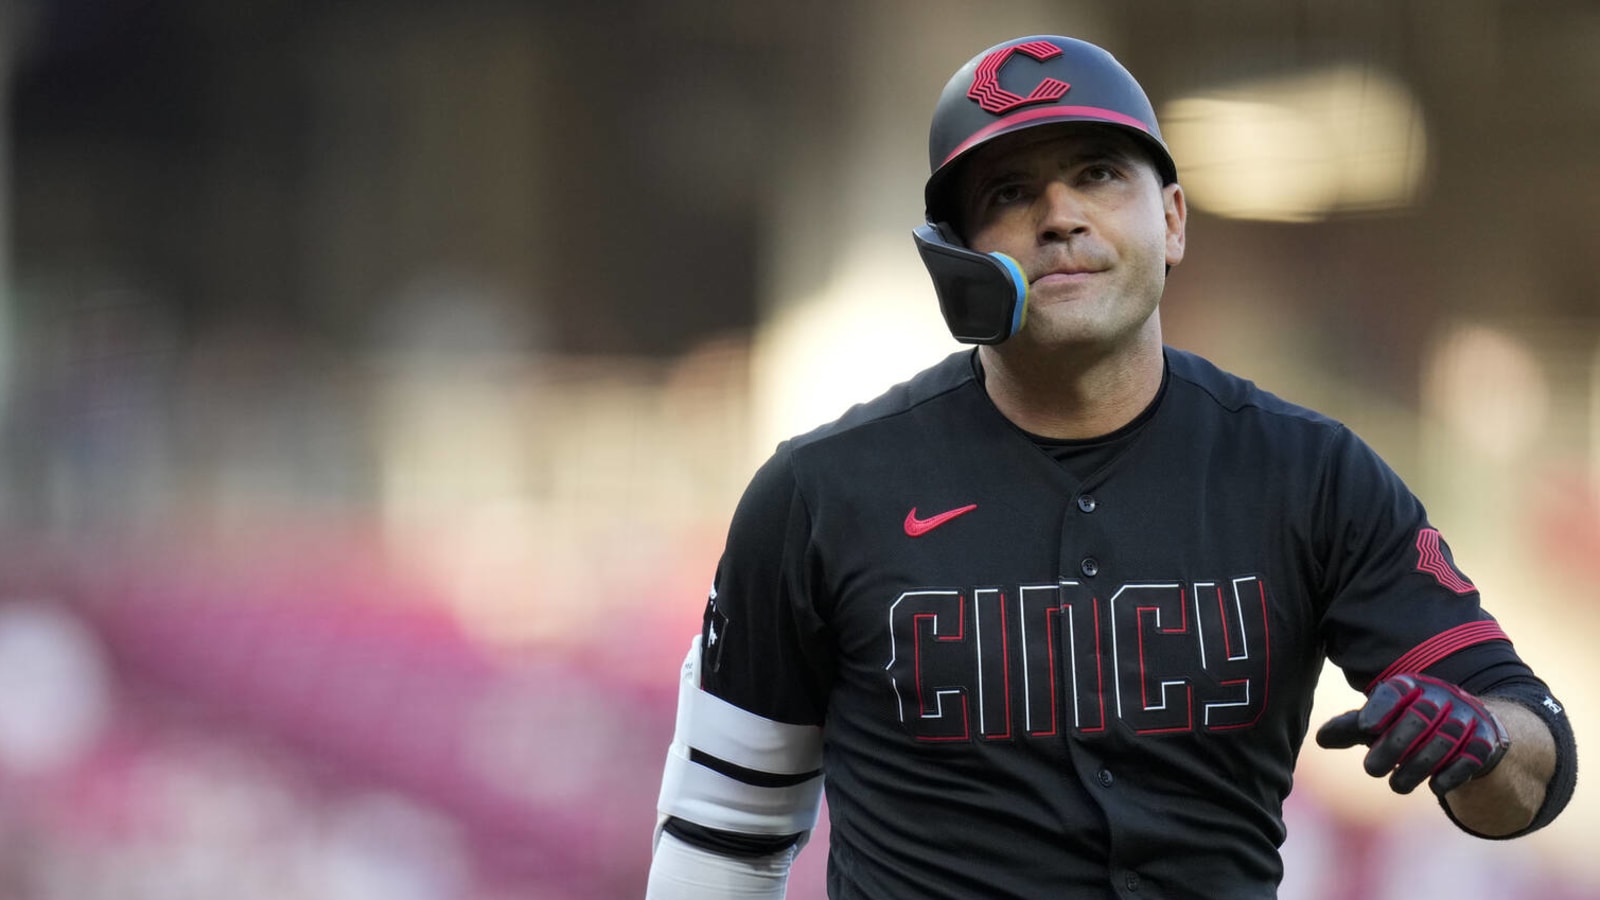 Injury timeline for Joey Votto revealed by manager David Bell